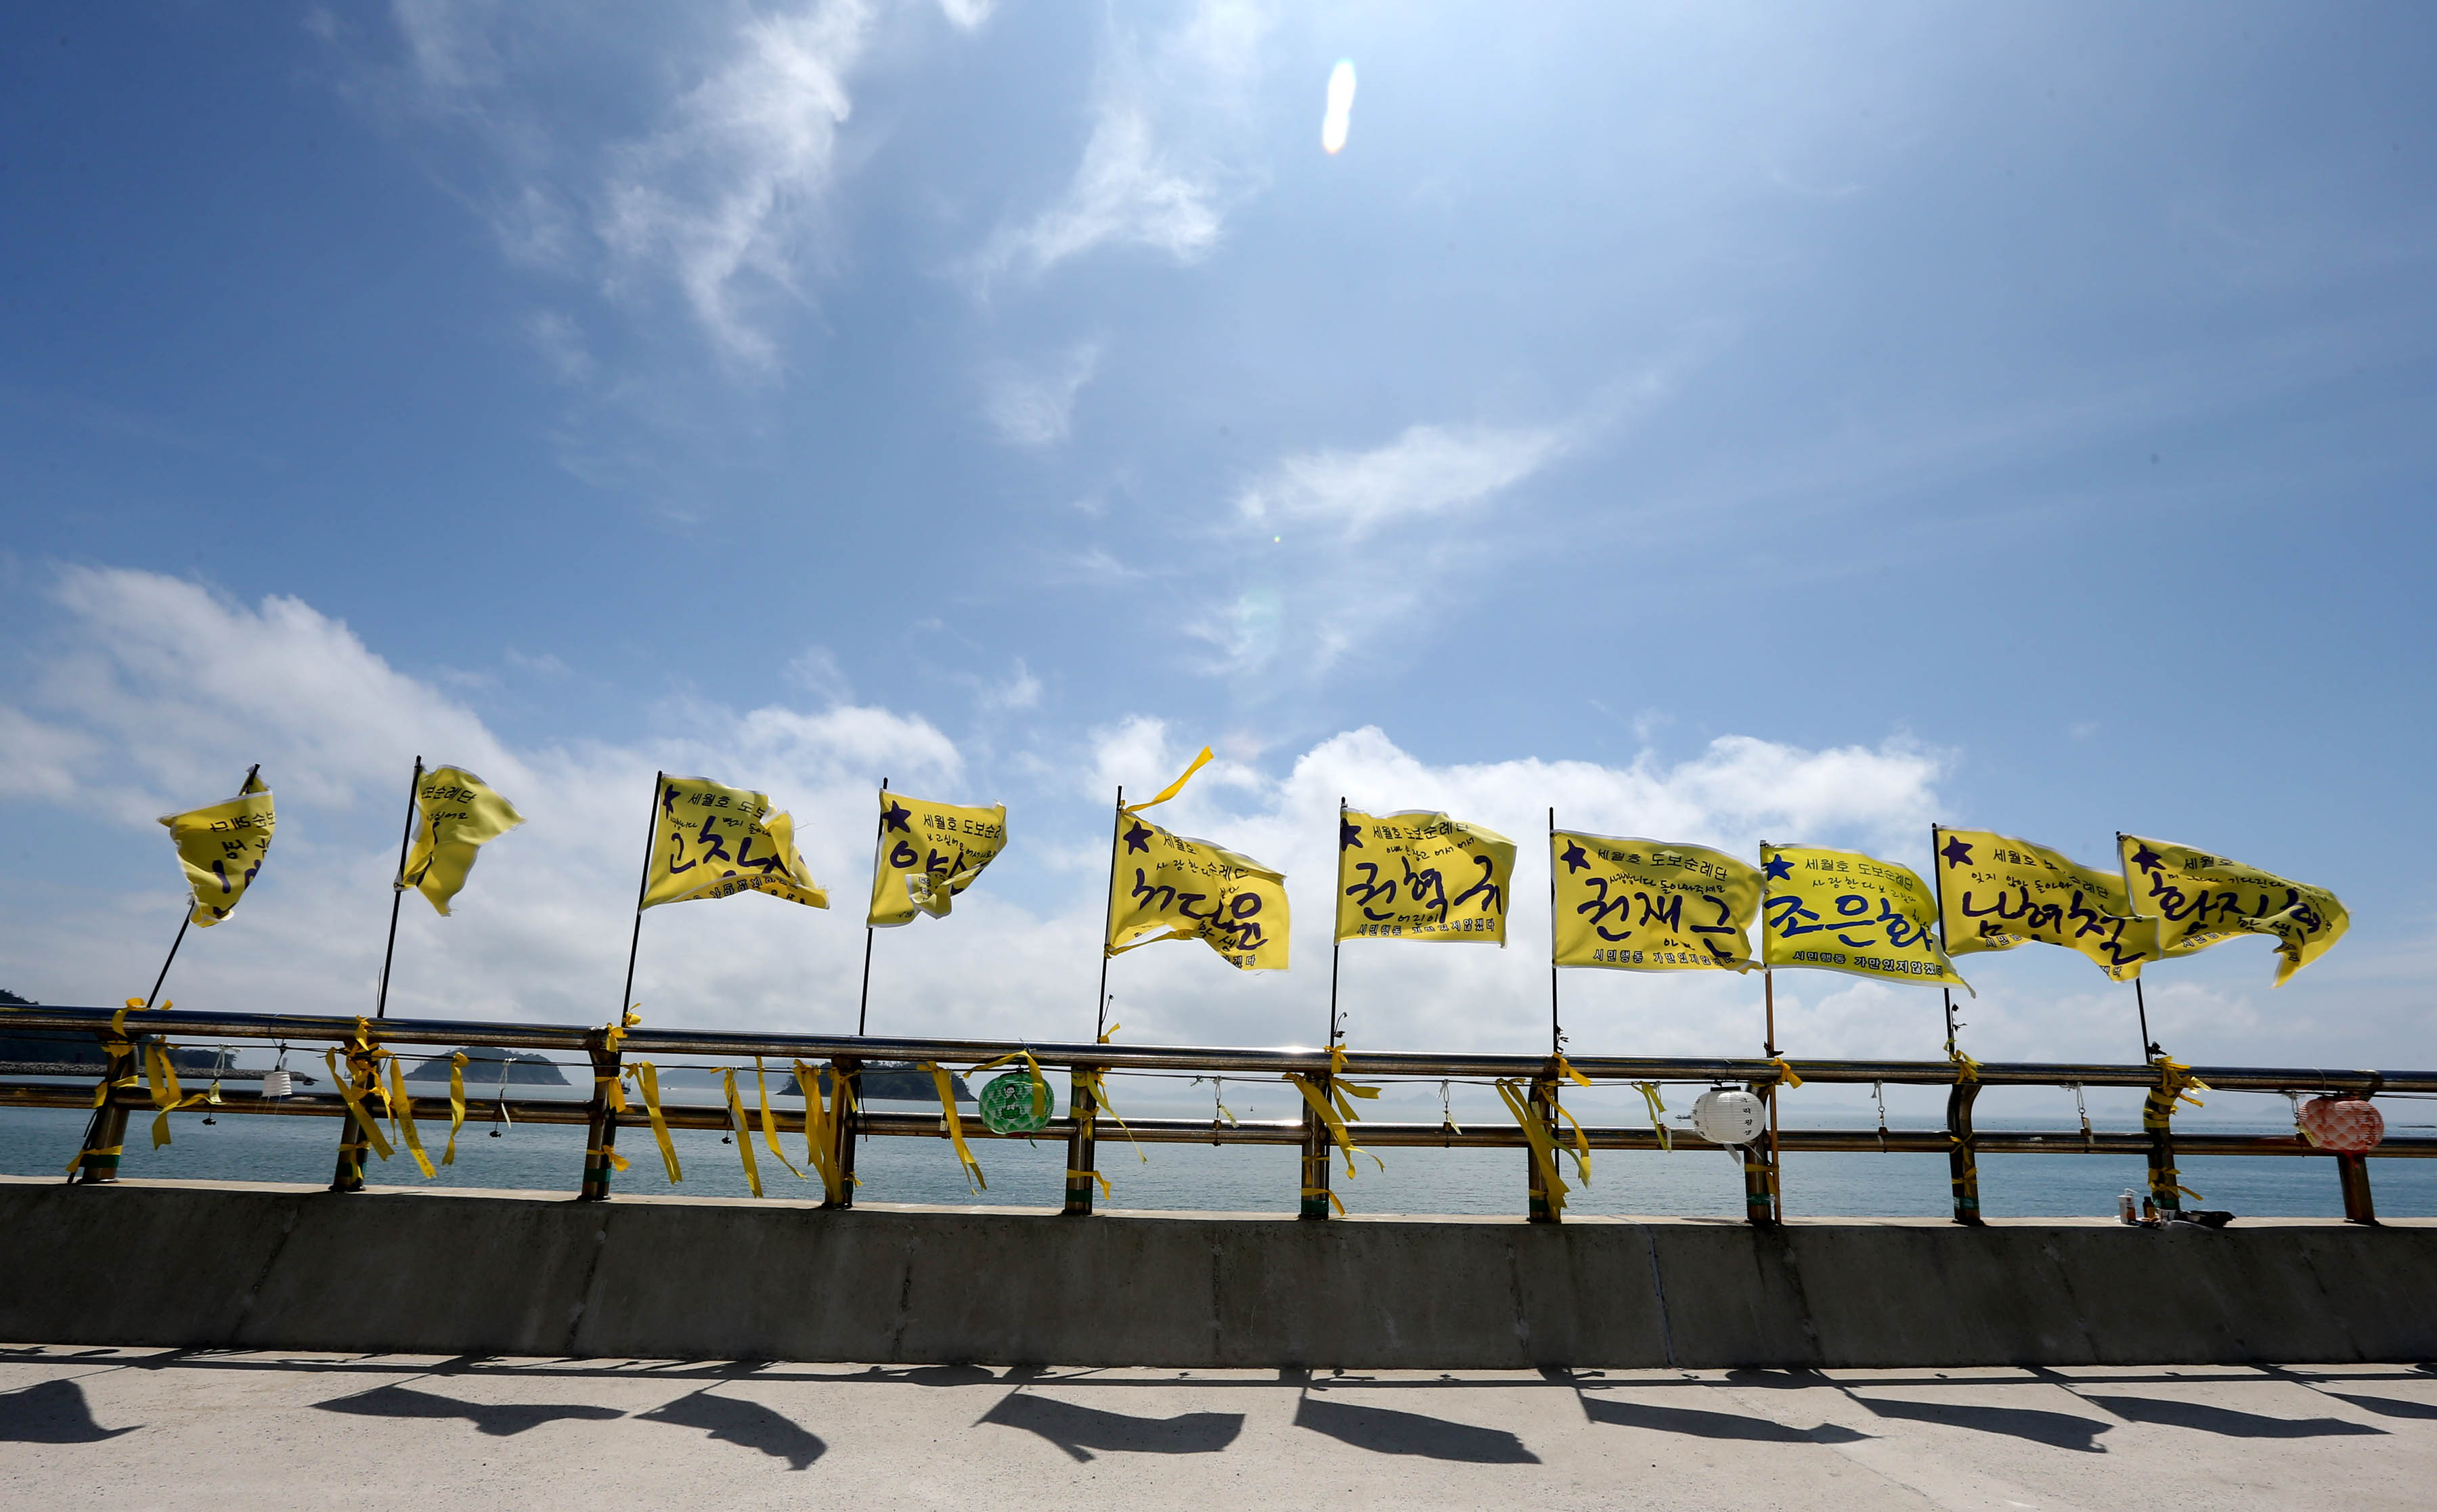 Flags written with the names of 10 victims of the Sewol sinking wave in the wind in Jindo. (Hyung Min-woo/Yonhap)